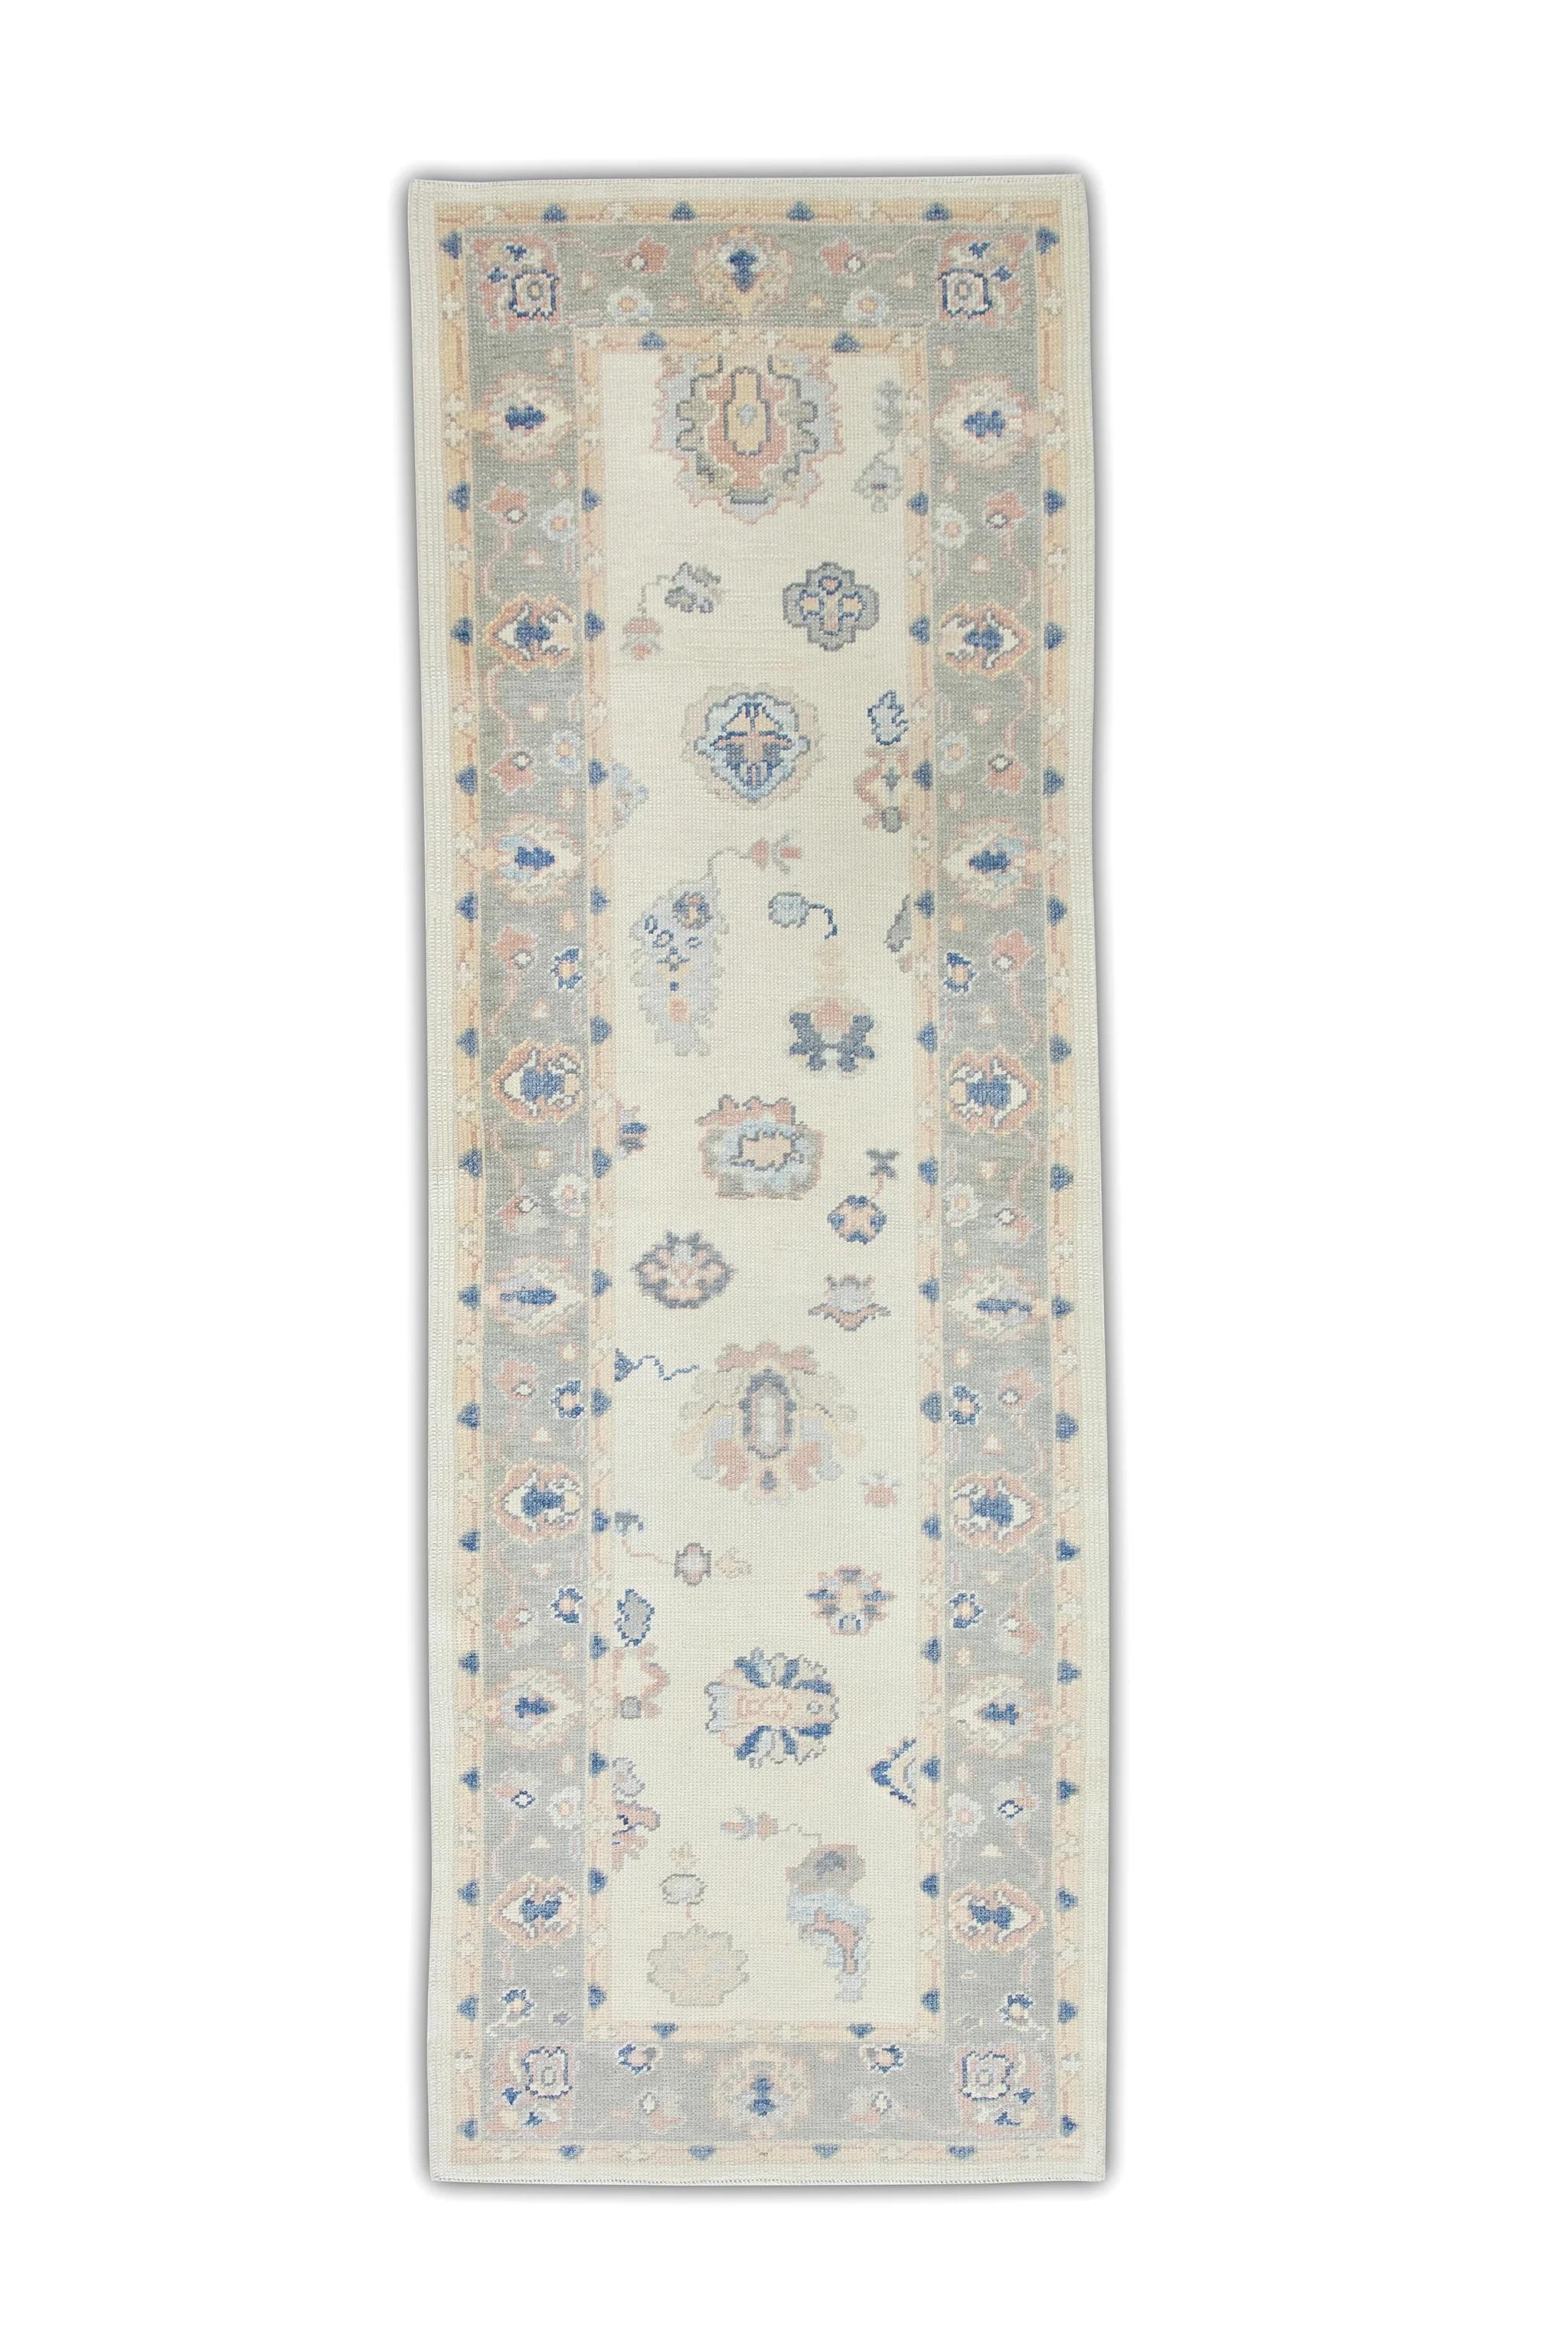 Contemporary Cream Handwoven Wool Turkish Oushak Rug in Pink & Blue Floral Design 3' x 8'11